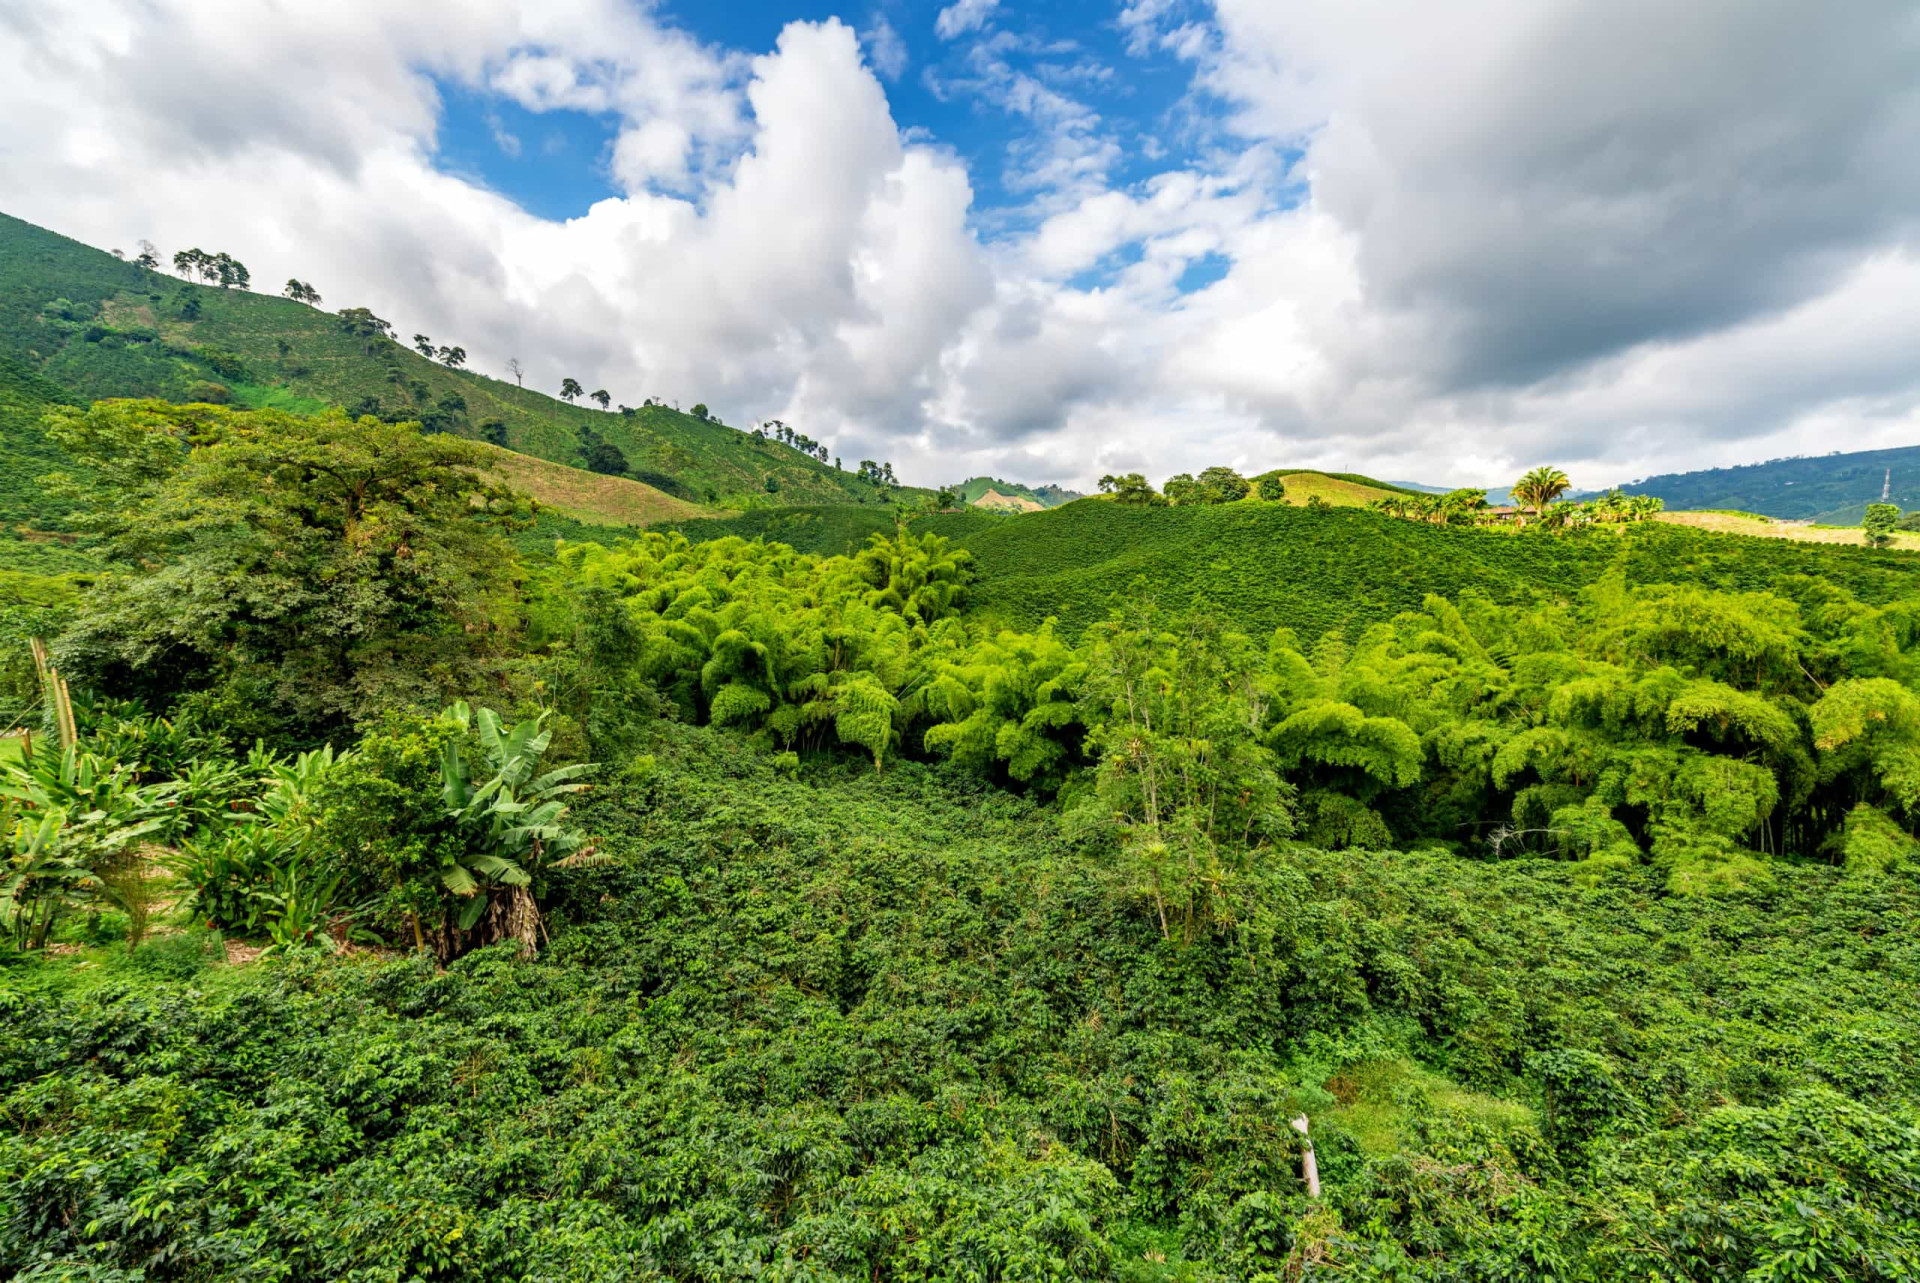 Location: Caldas, Quindio, and Risaralda Departments<br>Criteria: Cultural<br>Year established: 2011<br>Description: Colombian coffee is renowned the world over for its quality and delicious taste. The 100-year-old coffee cultivation is emblematic of Colombian culture and has impacted social traditions in music, architecture, education, and cuisine.<p>You may also like:<a href="https://www.starsinsider.com/n/456388?utm_source=msn.com&utm_medium=display&utm_campaign=referral_description&utm_content=413555v12en-us"> World records that Guinness refuses to accept</a></p>